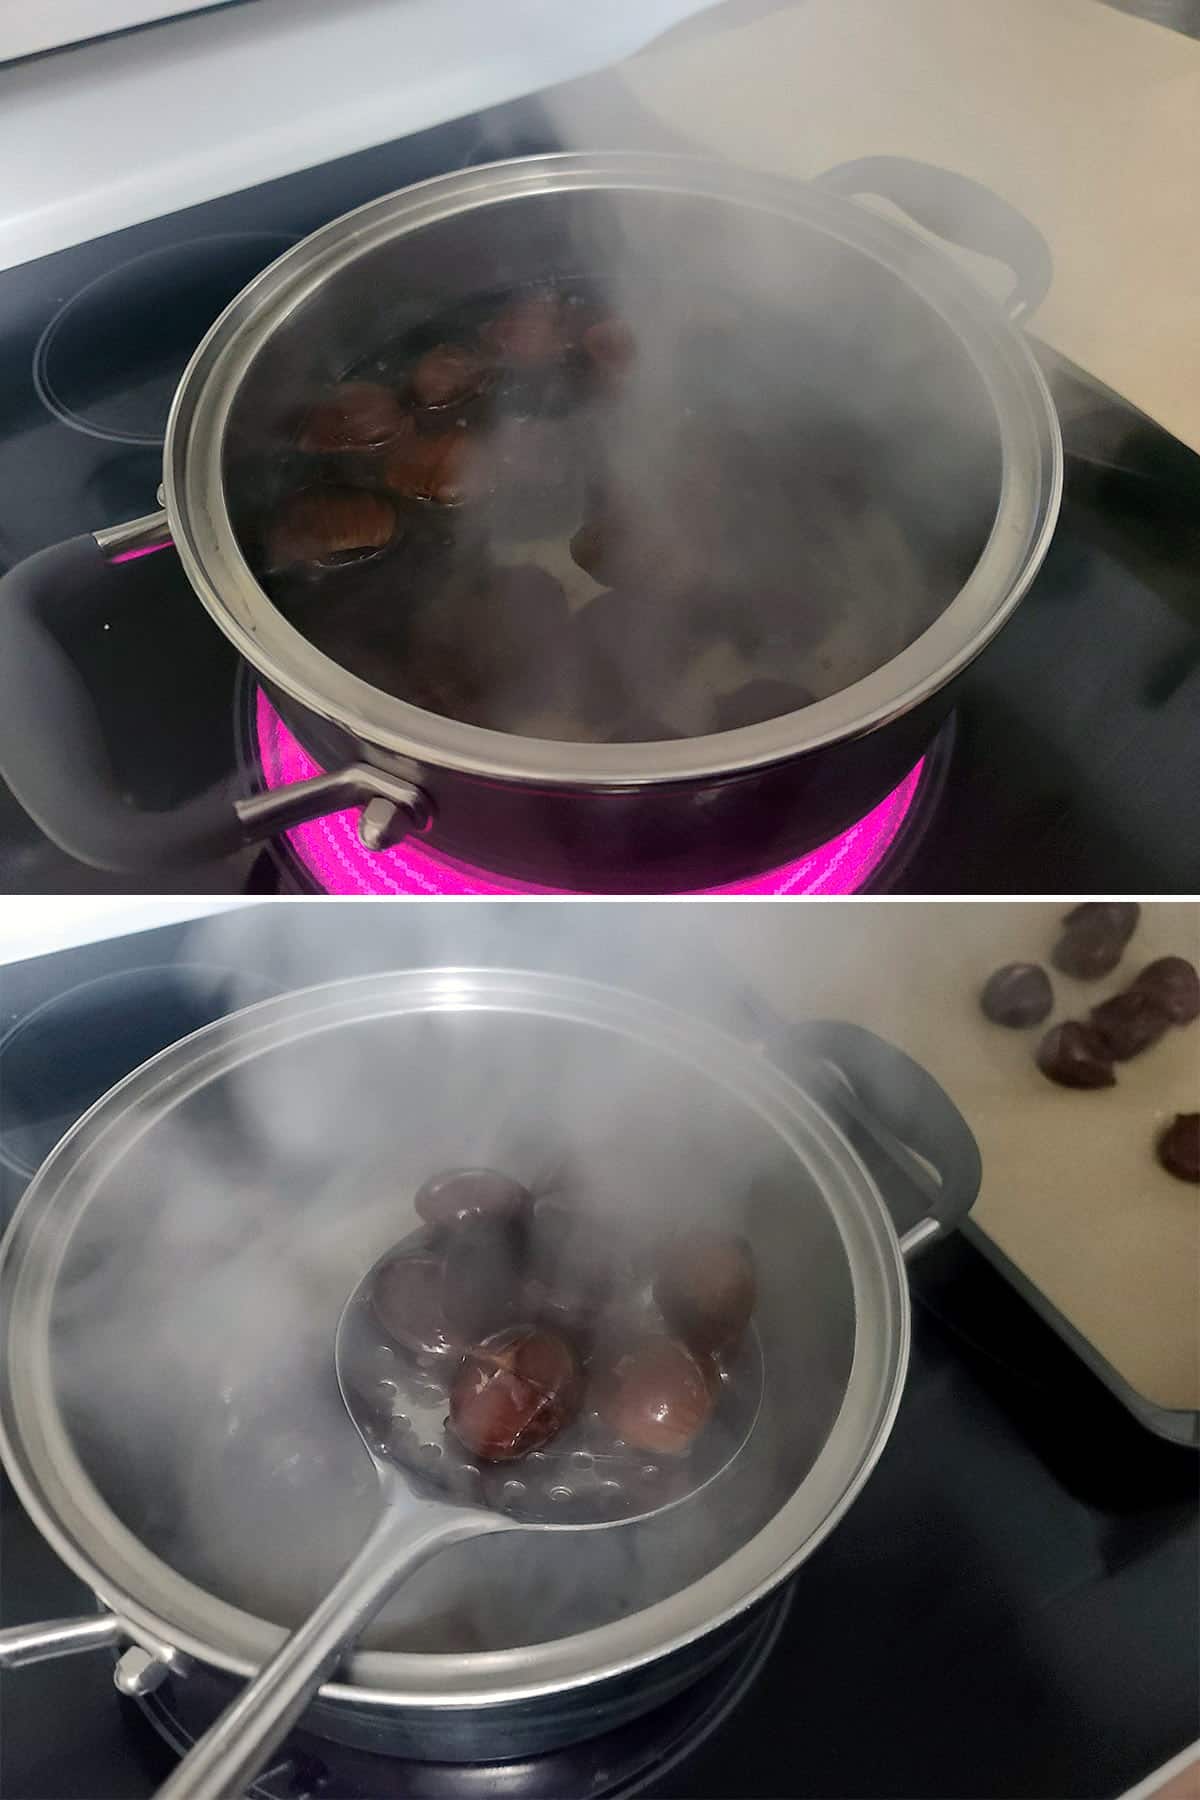 A two part image showing the chestnuts in steaming water, then being lifted out of boiling water with a slotted spoon.